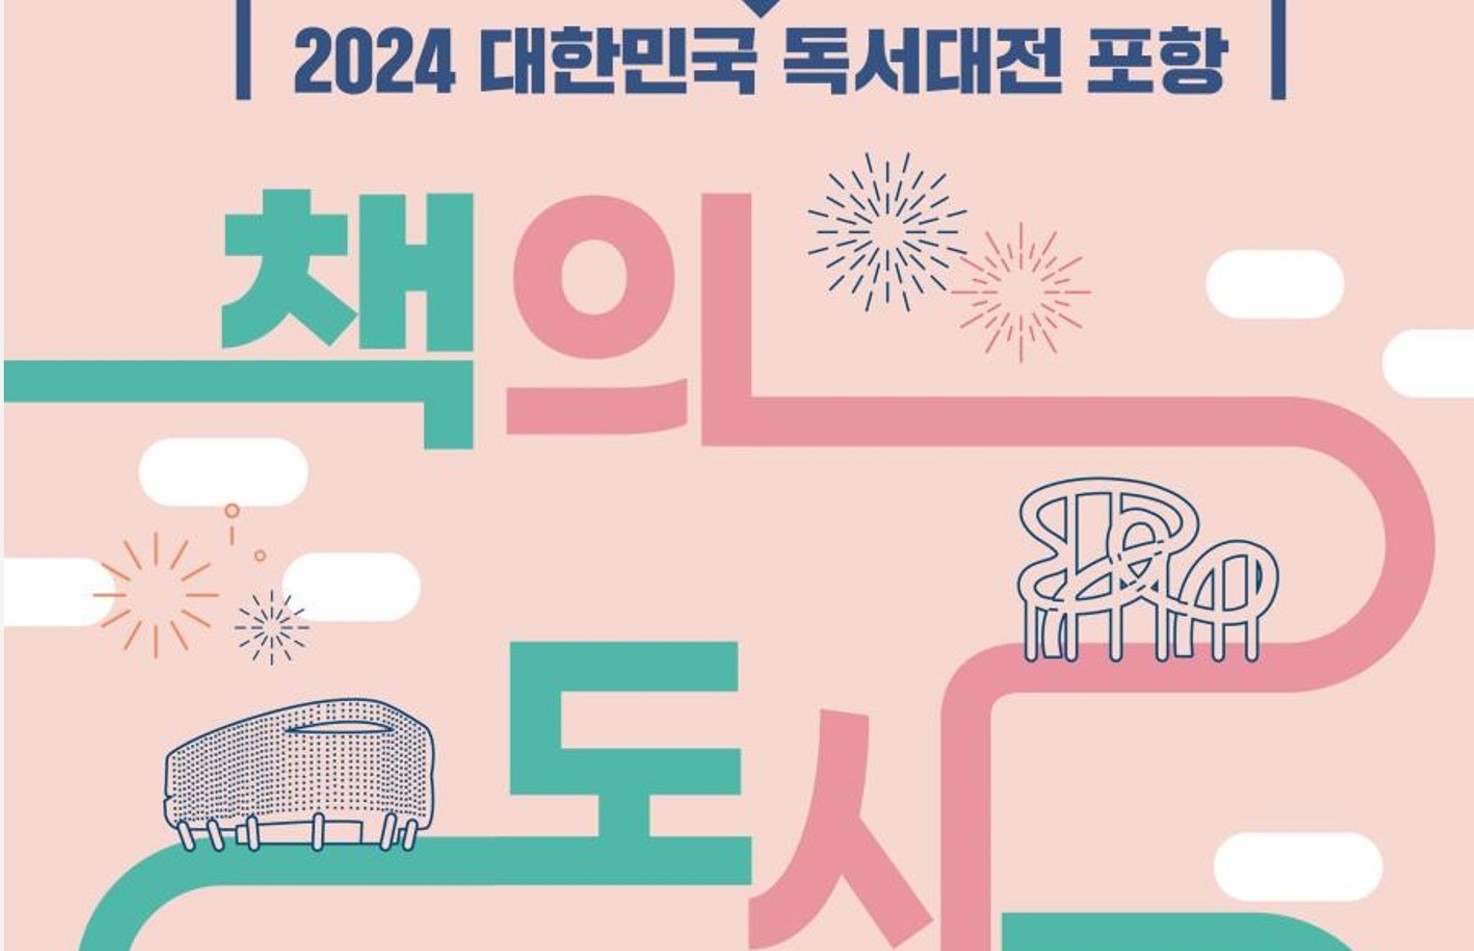 MCST announces Pohang as the 2024 City of Books image